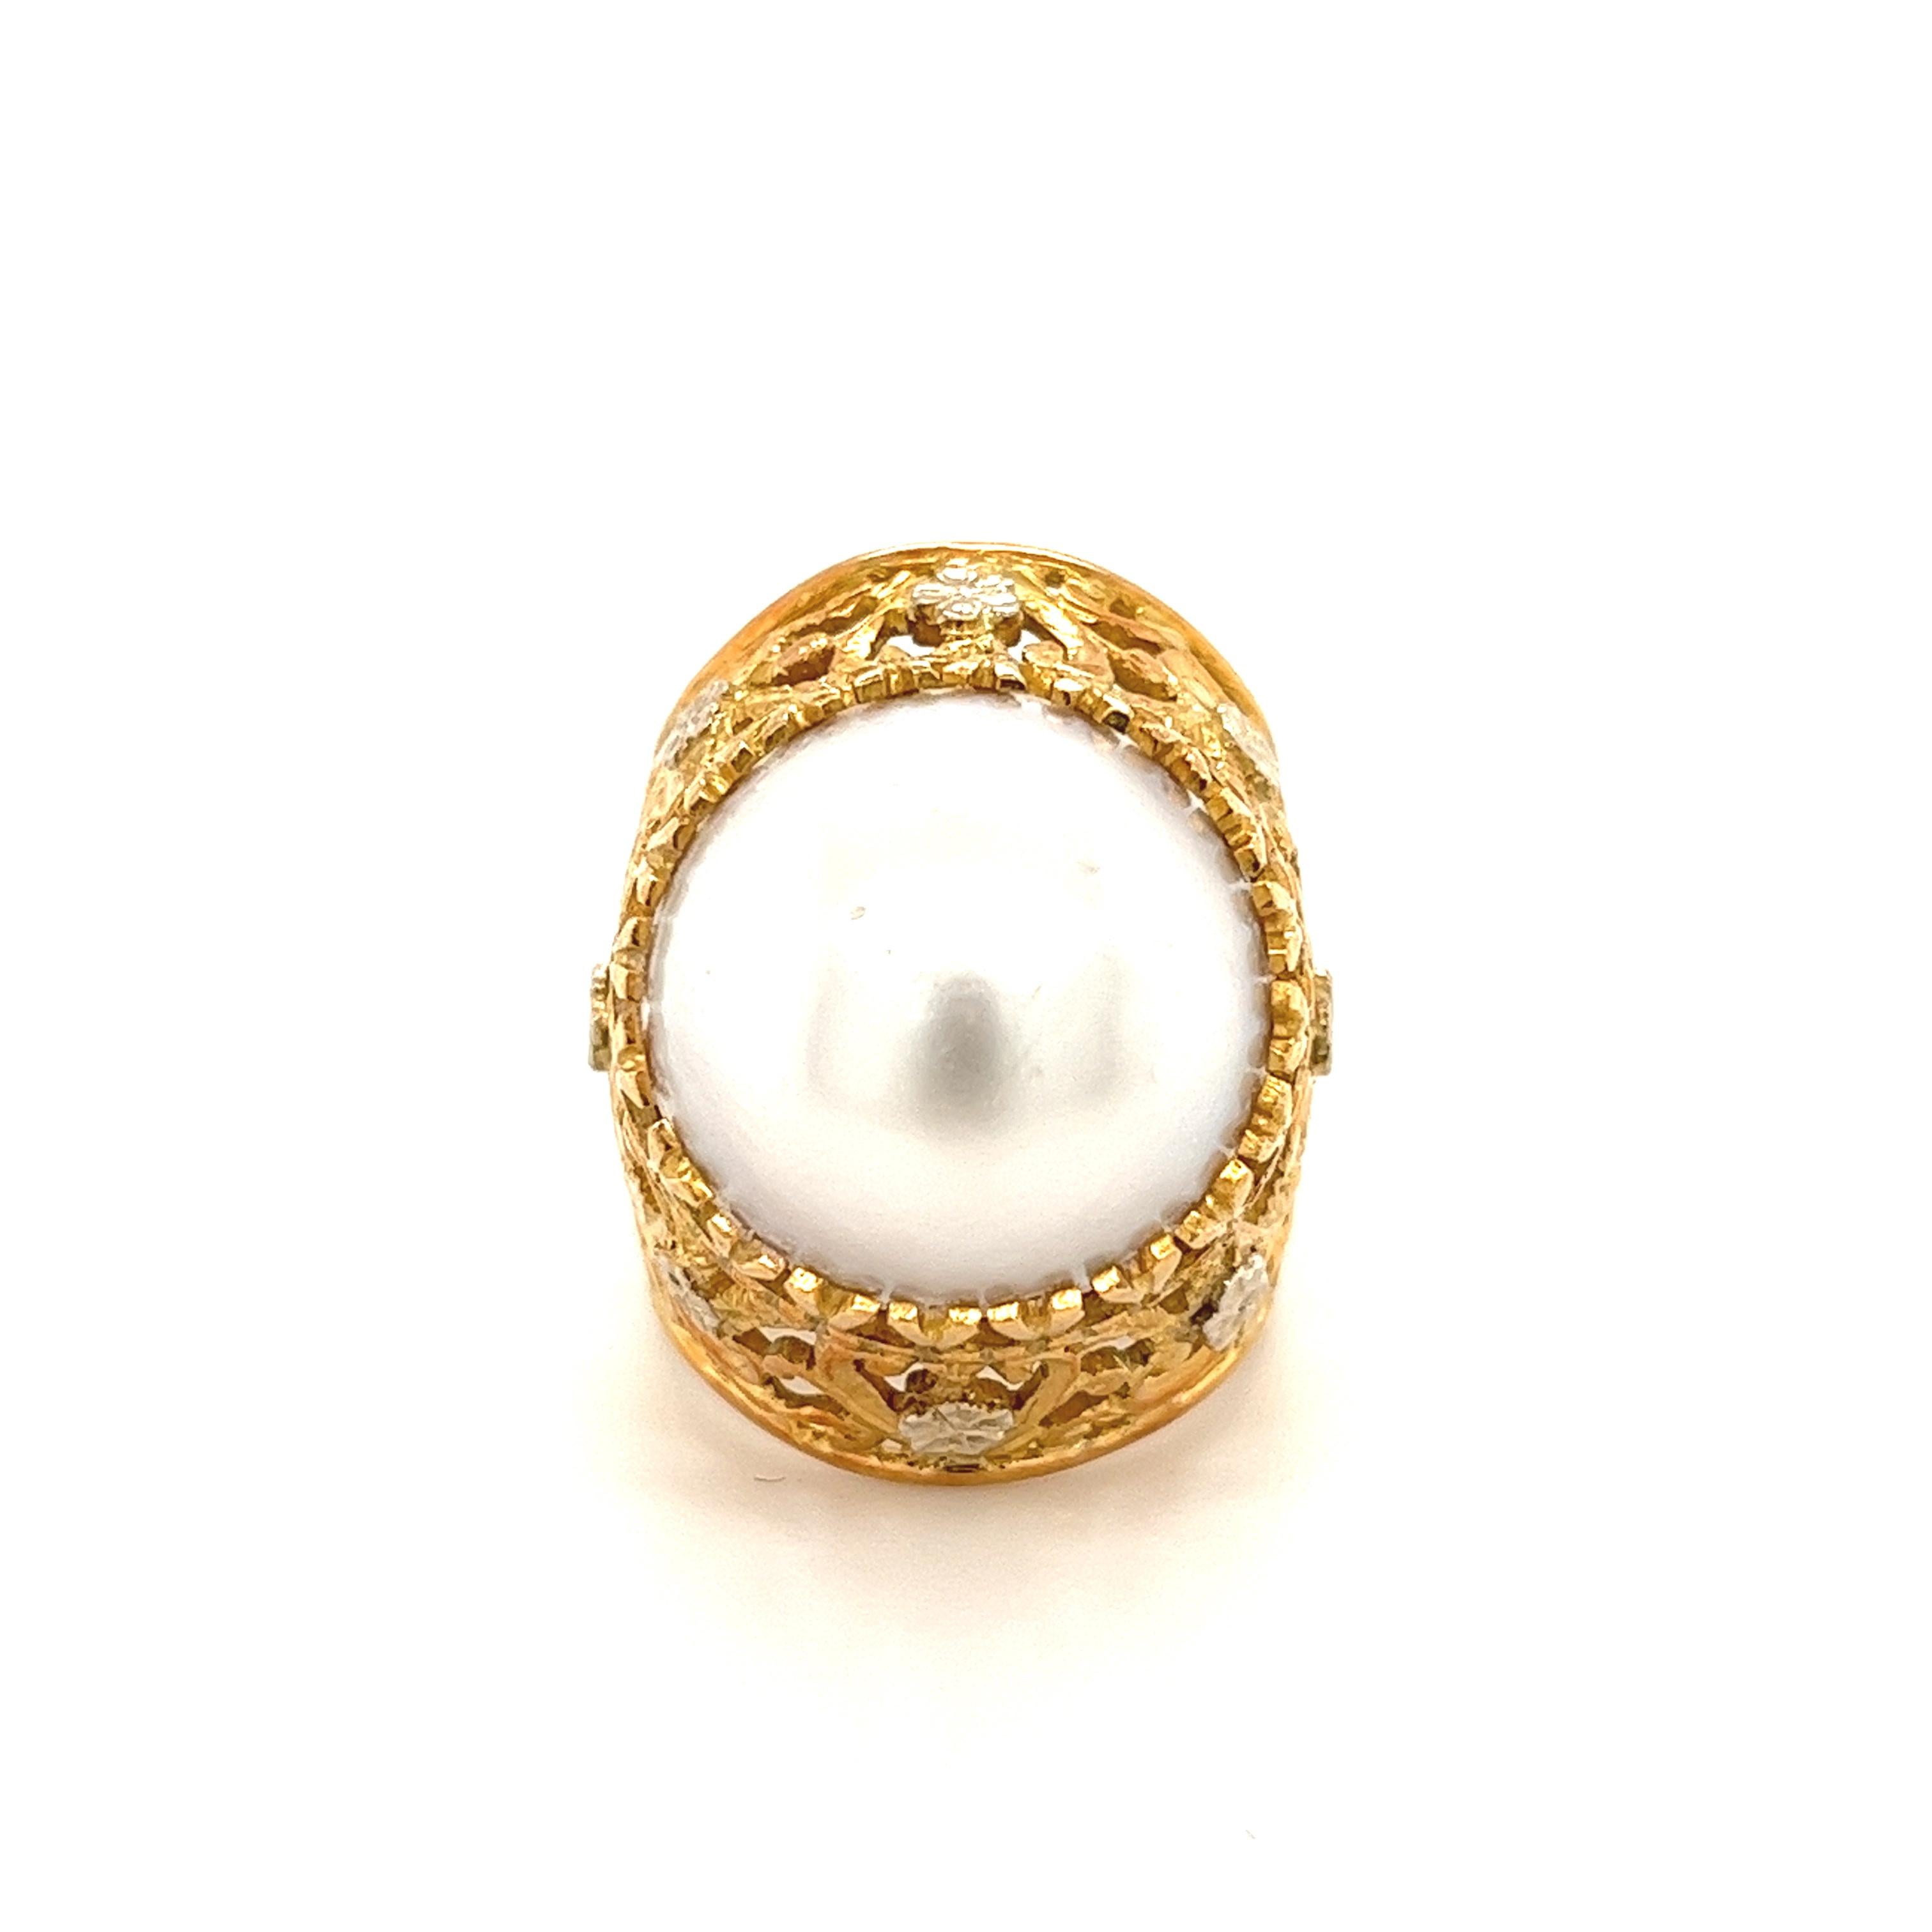 Gorgeous art nouveau style pinky ring featuring an 18k yellow gold band with an ornately carved design and a 15.3mm white freshwater pearl center stone. An expertly hand-crafted ring with practical features that make it ideal for everyday wear. The